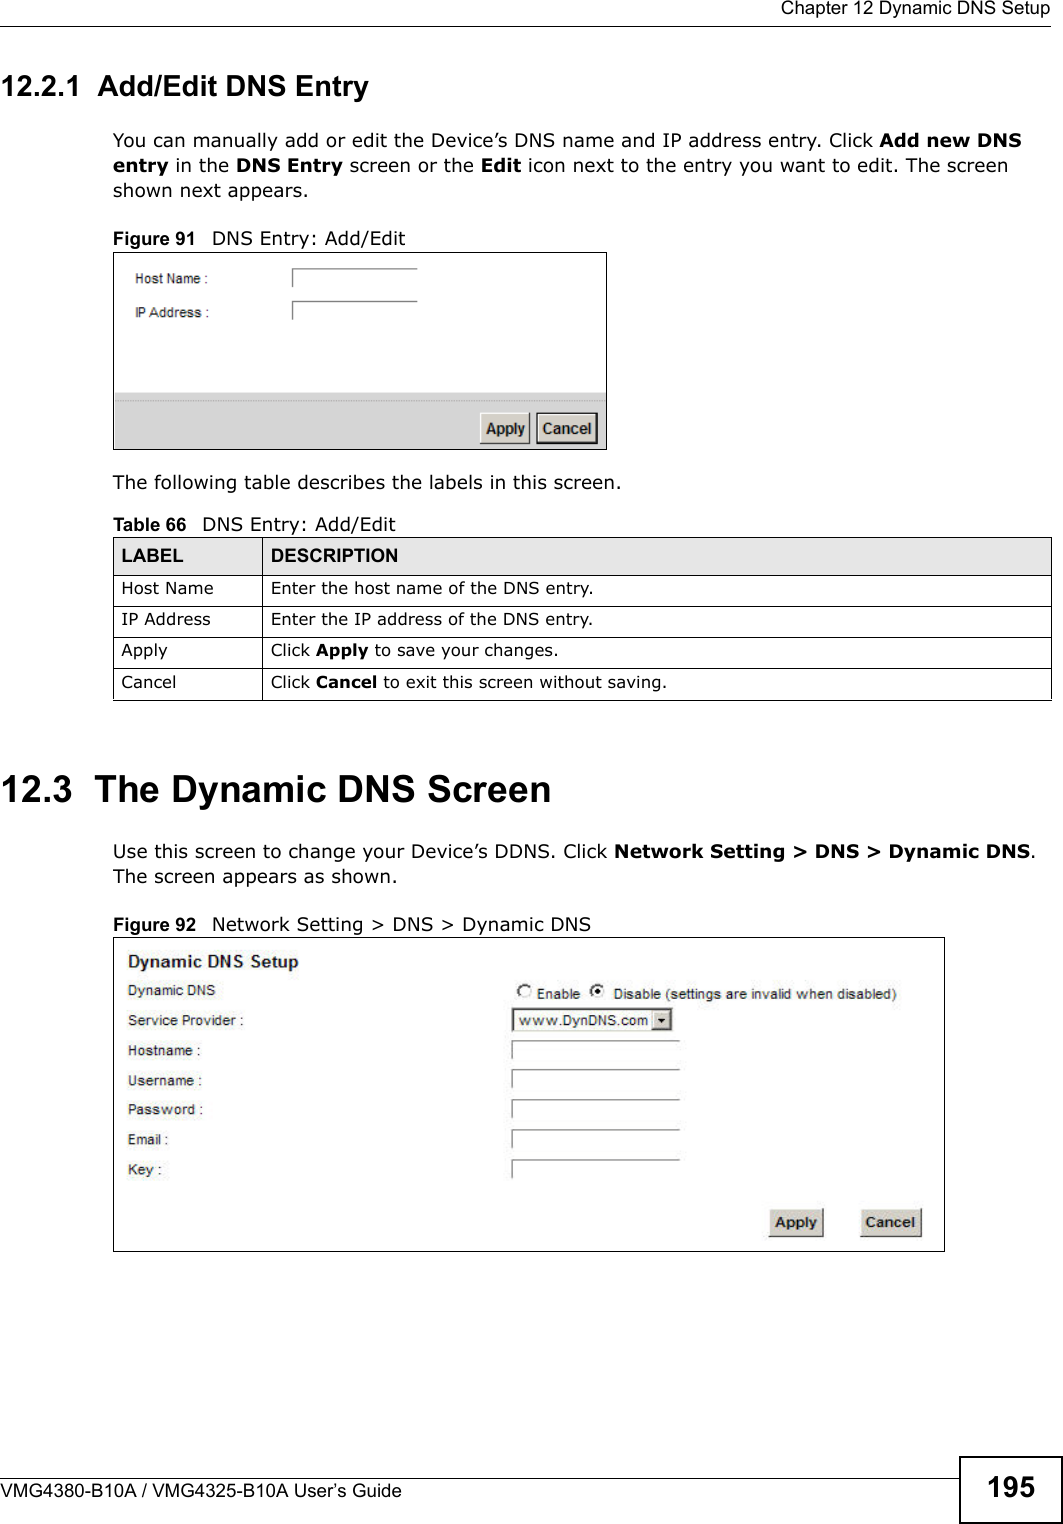  Chapter 12 Dynamic DNS SetupVMG4380-B10A / VMG4325-B10A User’s Guide 19512.2.1  Add/Edit DNS EntryYou can manually add or edit the Device’s DNS name and IP address entry. Click Add new DNS entry in the DNS Entry screen or the Edit icon next to the entry you want to edit. The screen shown next appears.Figure 91 DNS Entry: Add/EditThe following table describes the labels in this screen. 12.3  The Dynamic DNS ScreenUse this screen to change your Device’s DDNS. Click Network Setting &gt; DNS &gt; Dynamic DNS. The screen appears as shown.Figure 92   Network Setting &gt; DNS &gt; Dynamic DNSTable 66   DNS Entry: Add/EditLABEL DESCRIPTIONHost Name Enter the host name of the DNS entry.IP Address Enter the IP address of the DNS entry.Apply Click Apply to save your changes.Cancel Click Cancel to exit this screen without saving.